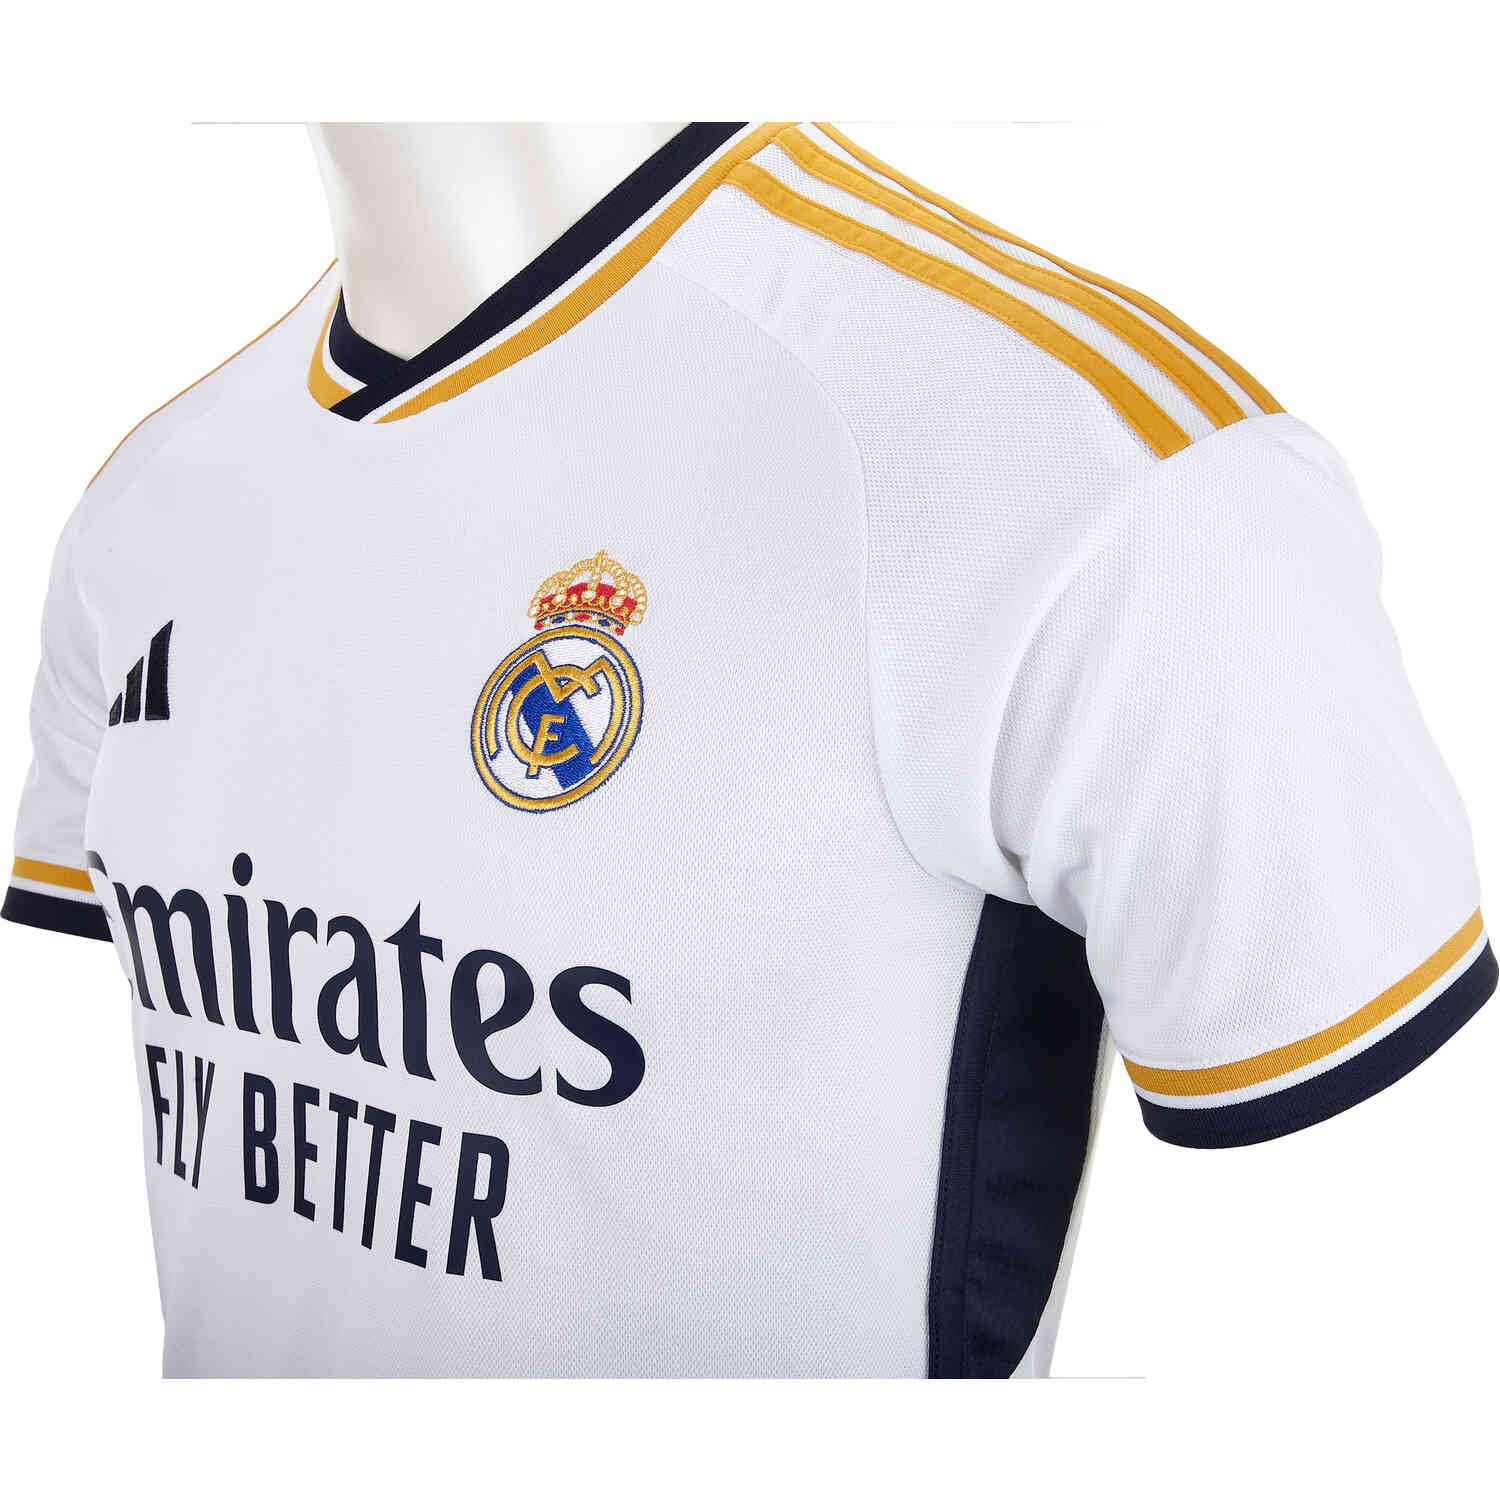 19/20 Real Madrid Home Jersey/ Fly Emirates (White Gold)